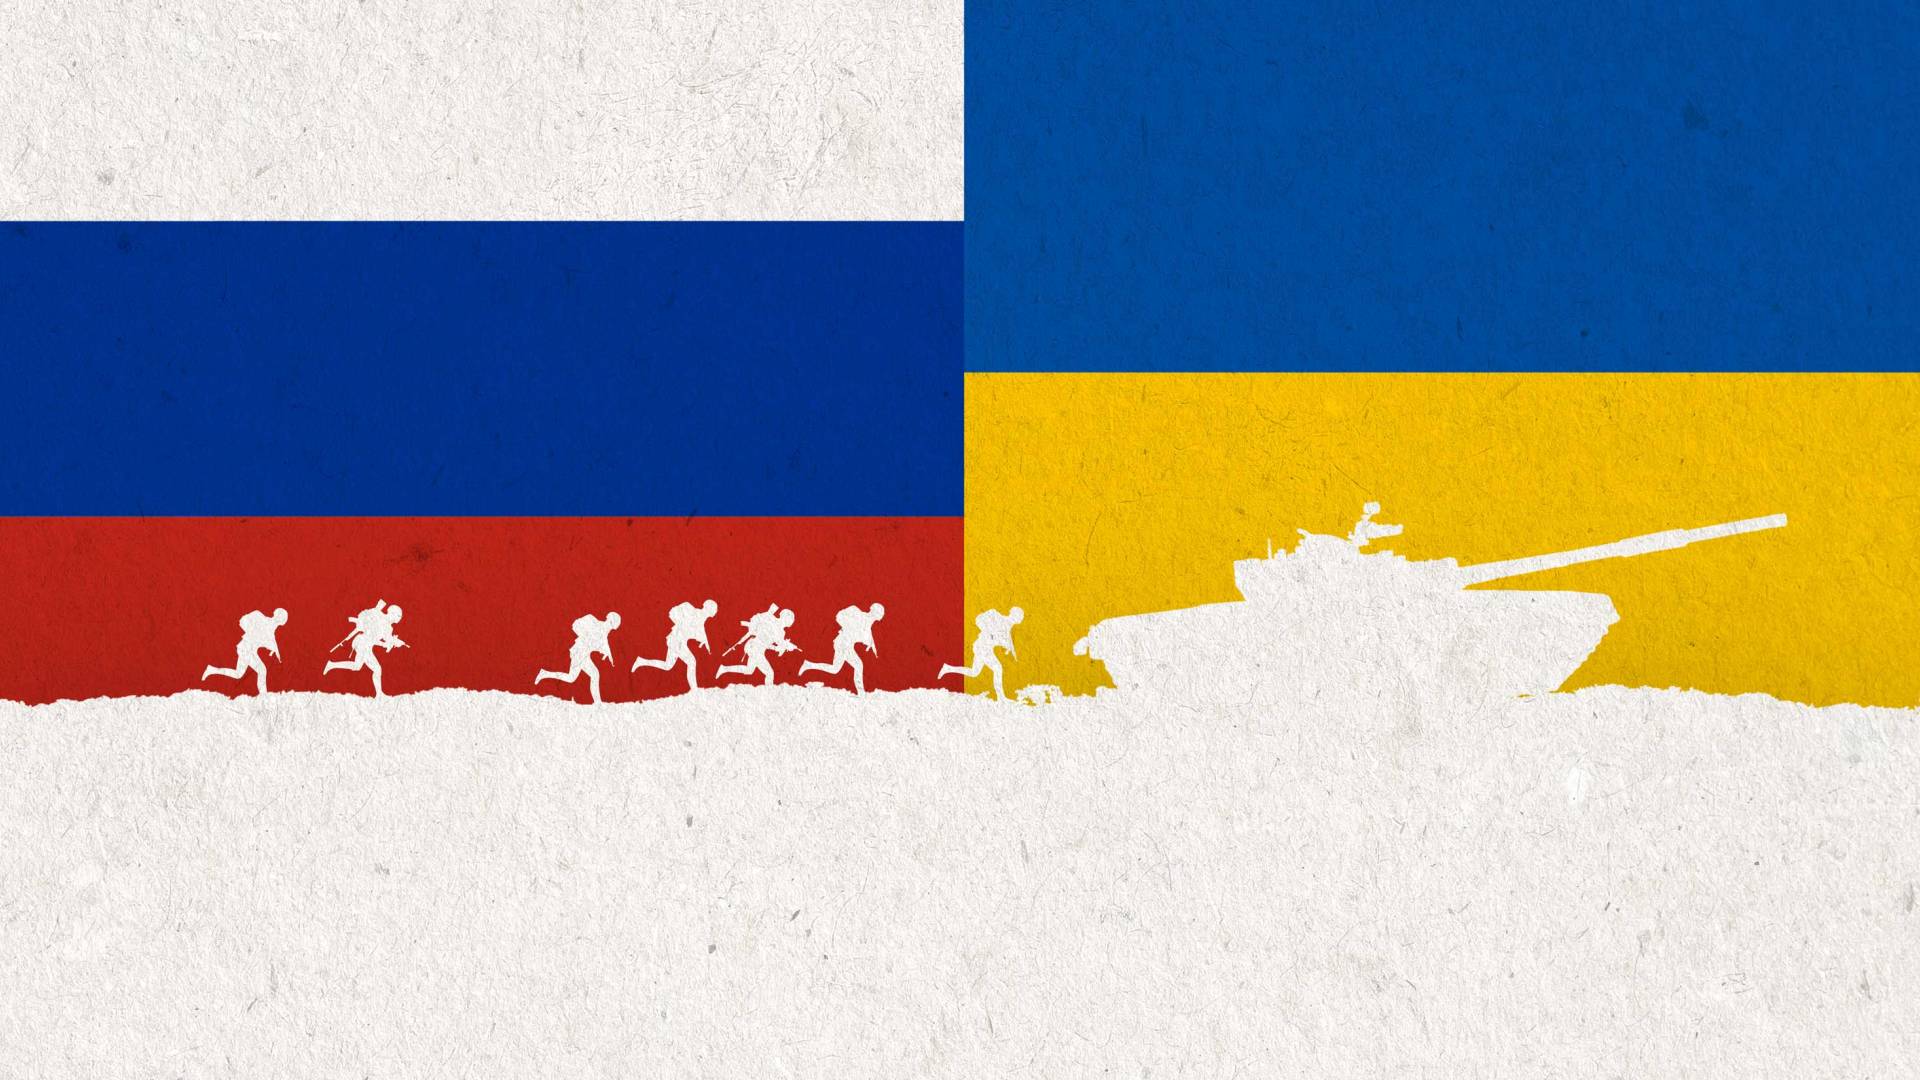 Princeton voices Speaking out on the Russian invasion of Ukraine